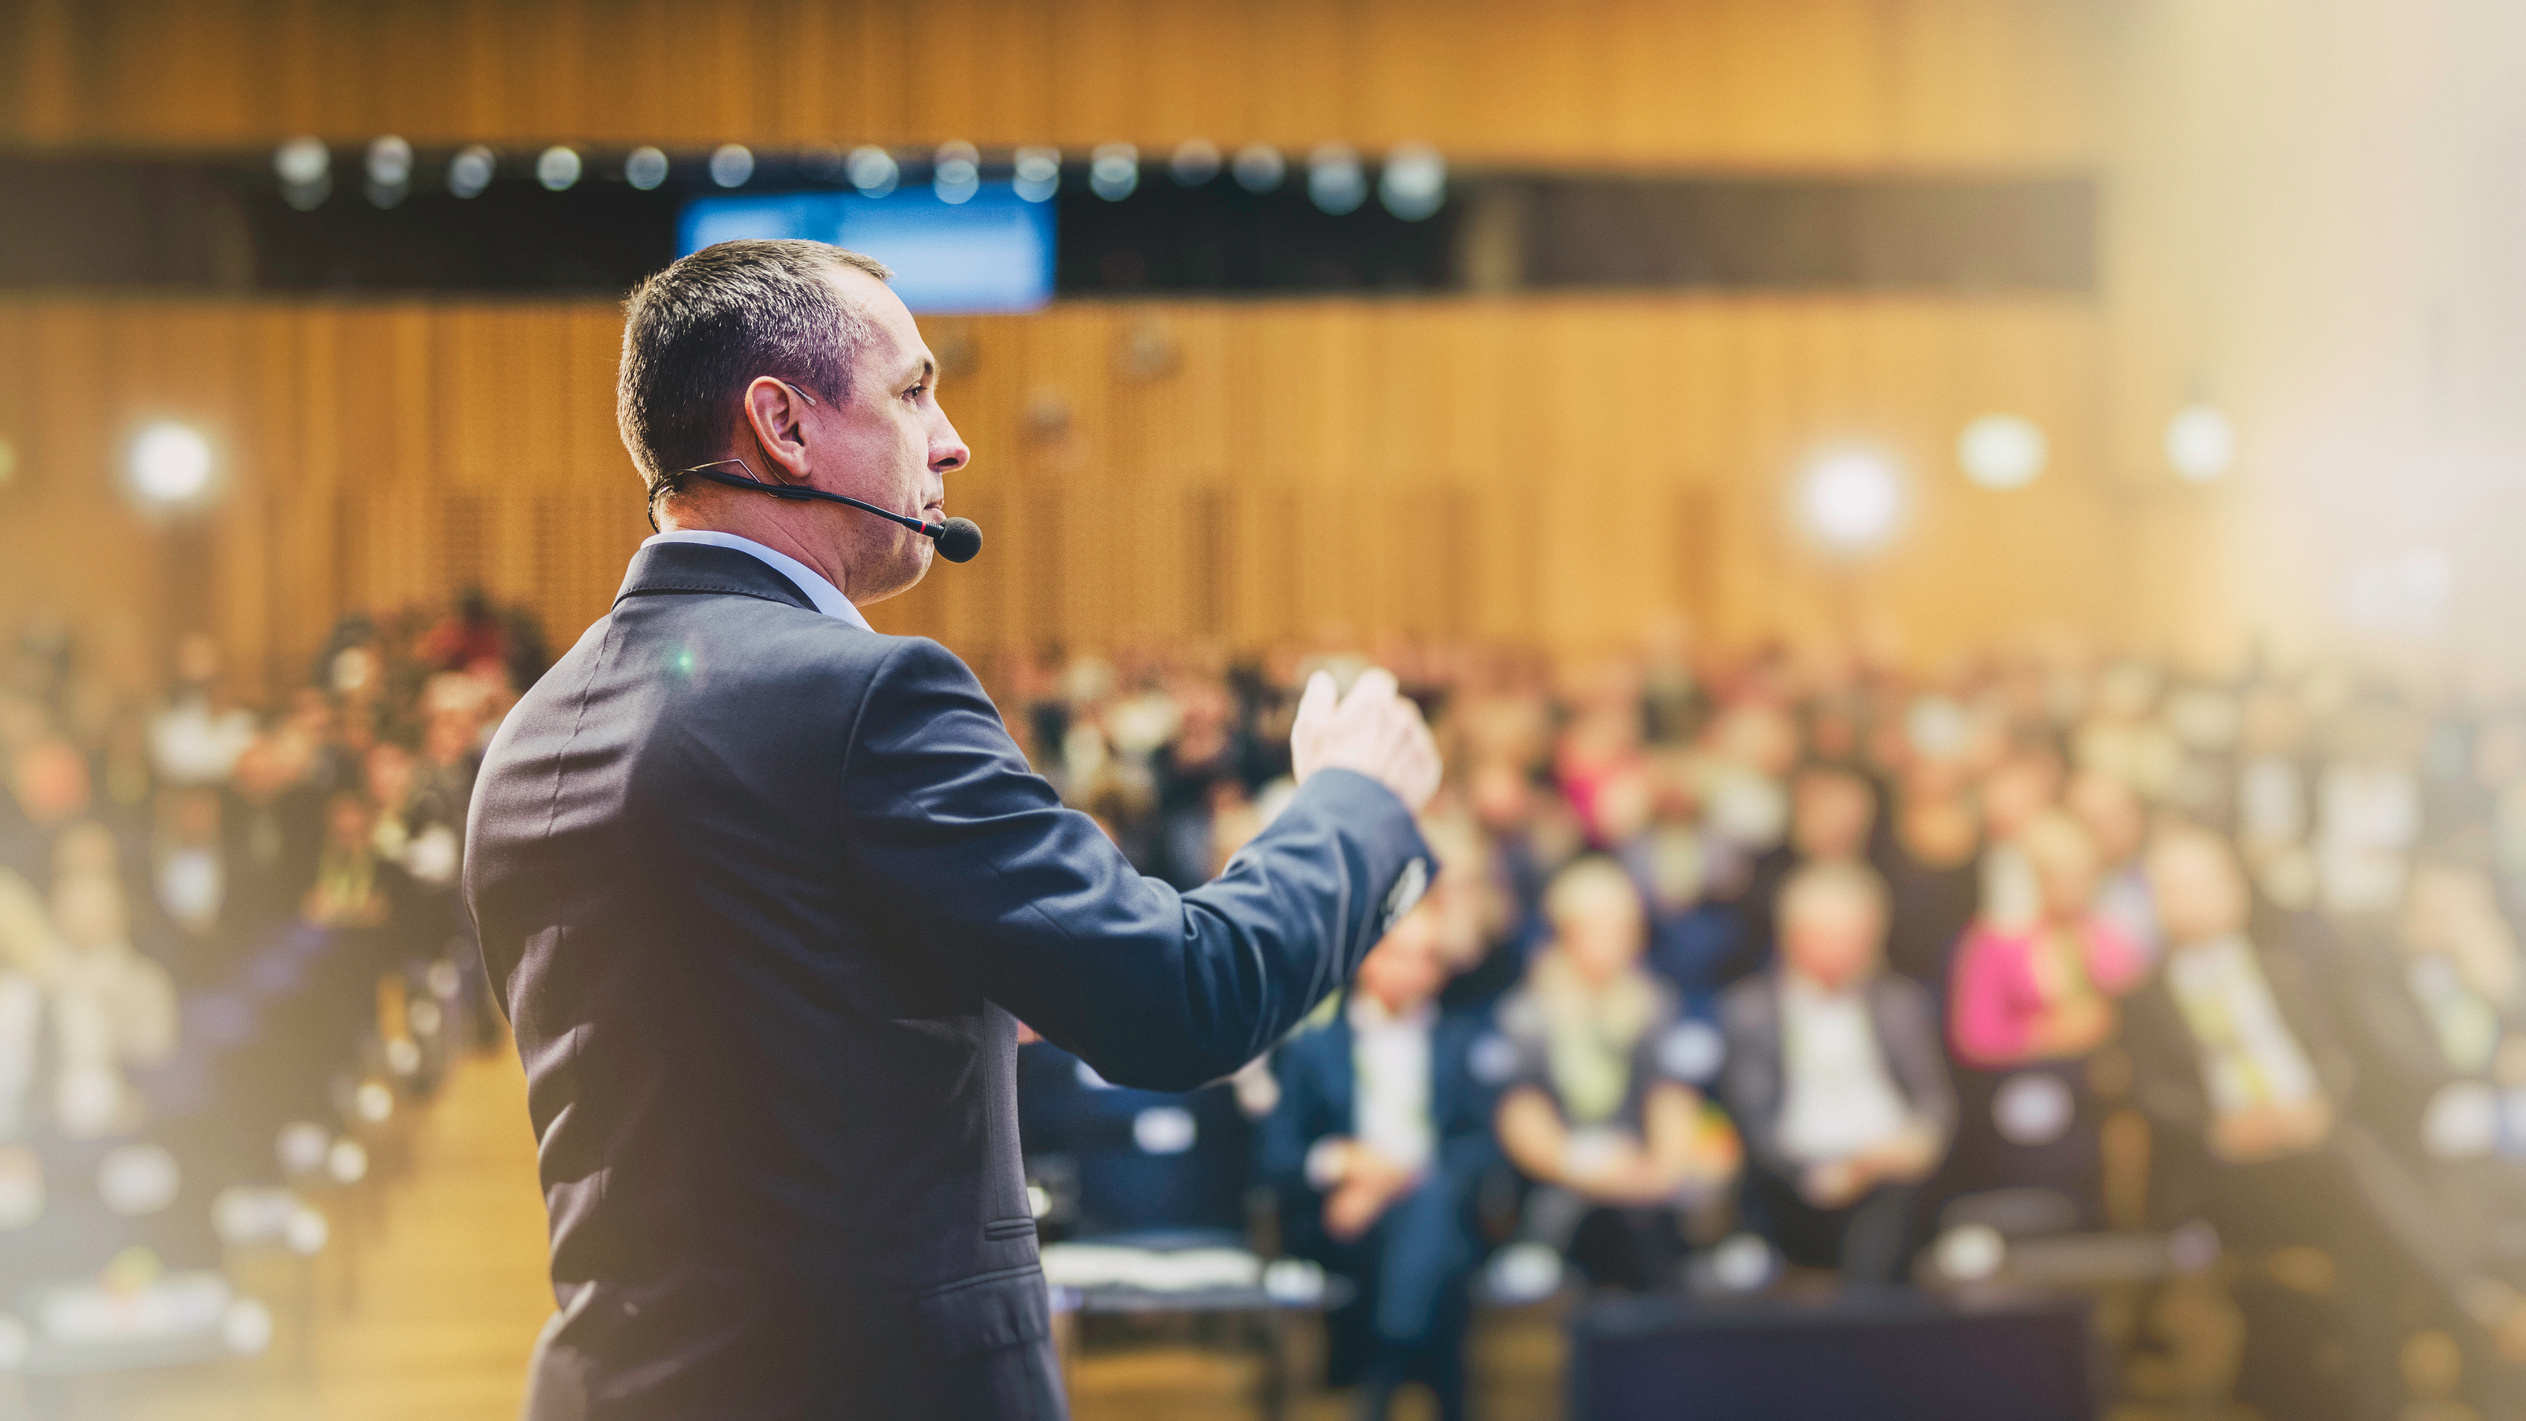 Entrepreneurial speech at a conference